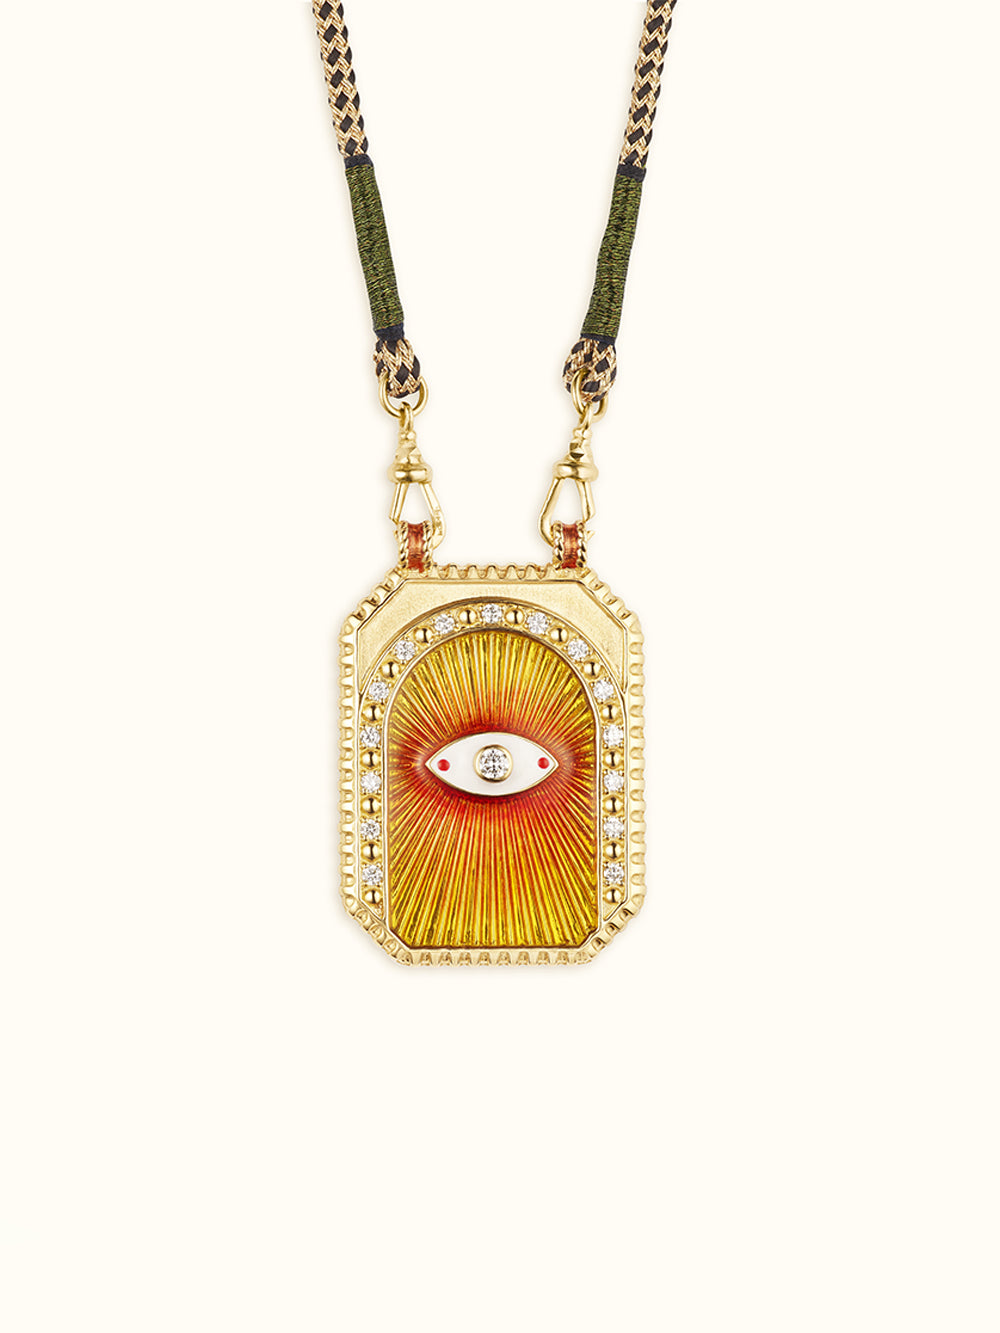 COLLIER SCAPULAIRE EYE PROTECT ORANGE